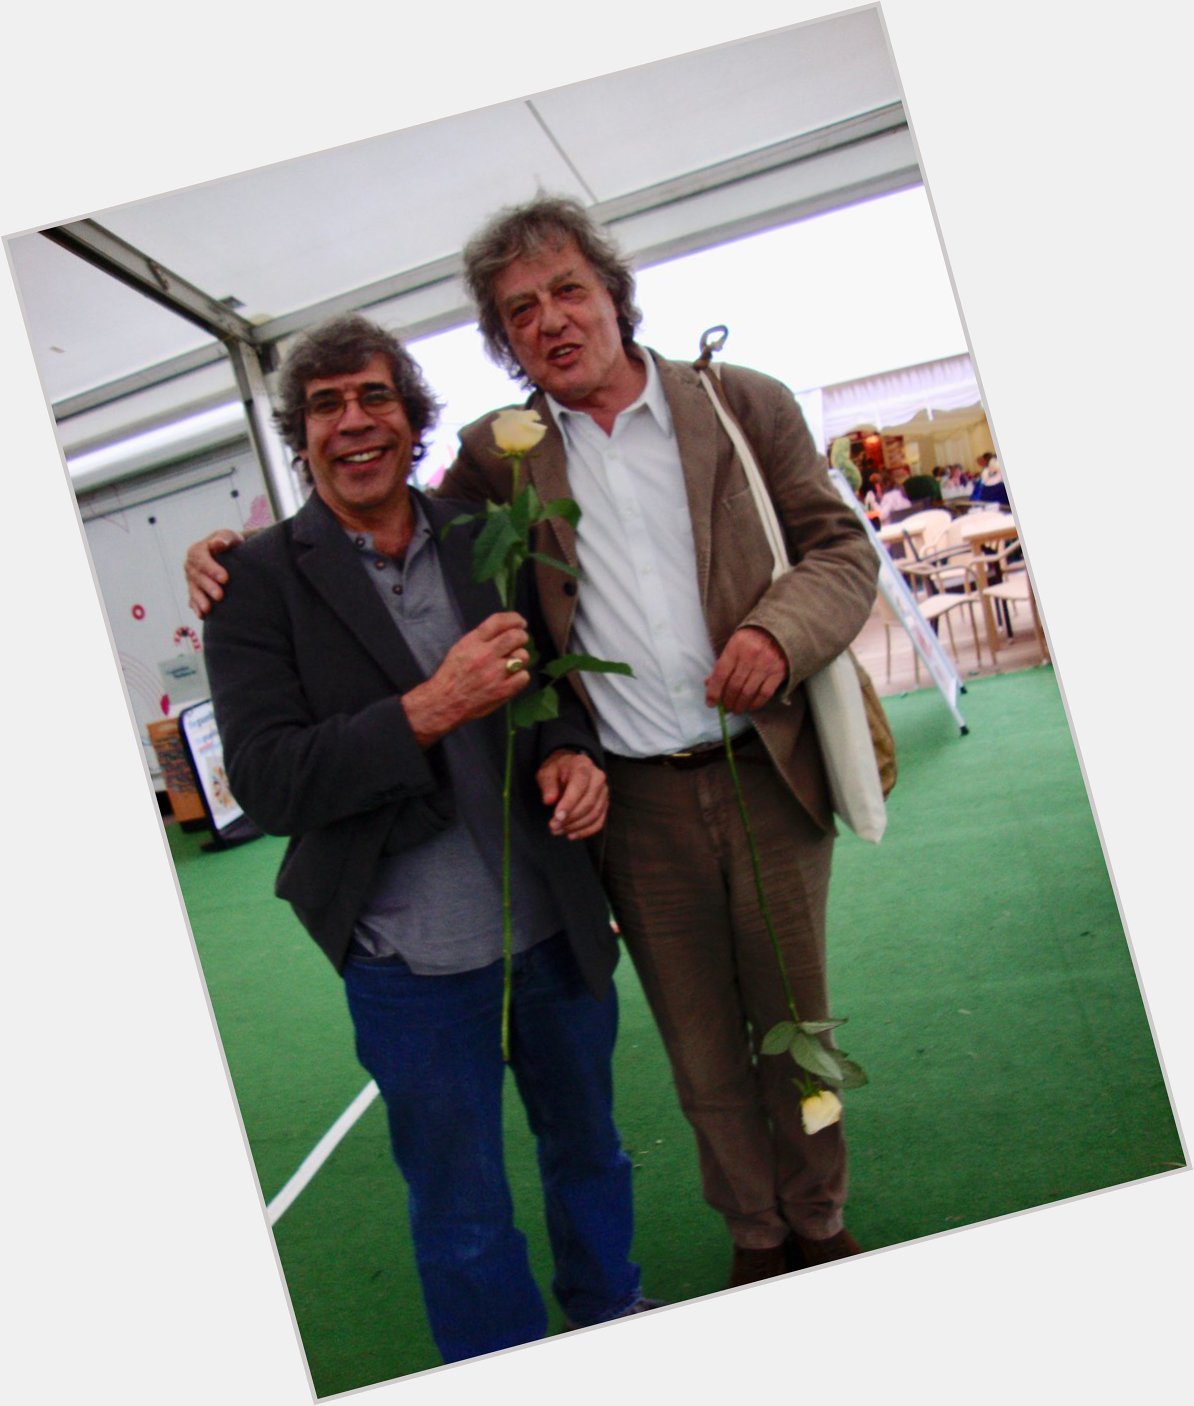 Happy birthday to Tom Stoppard, 83 today. This gives me a chance to show off. 